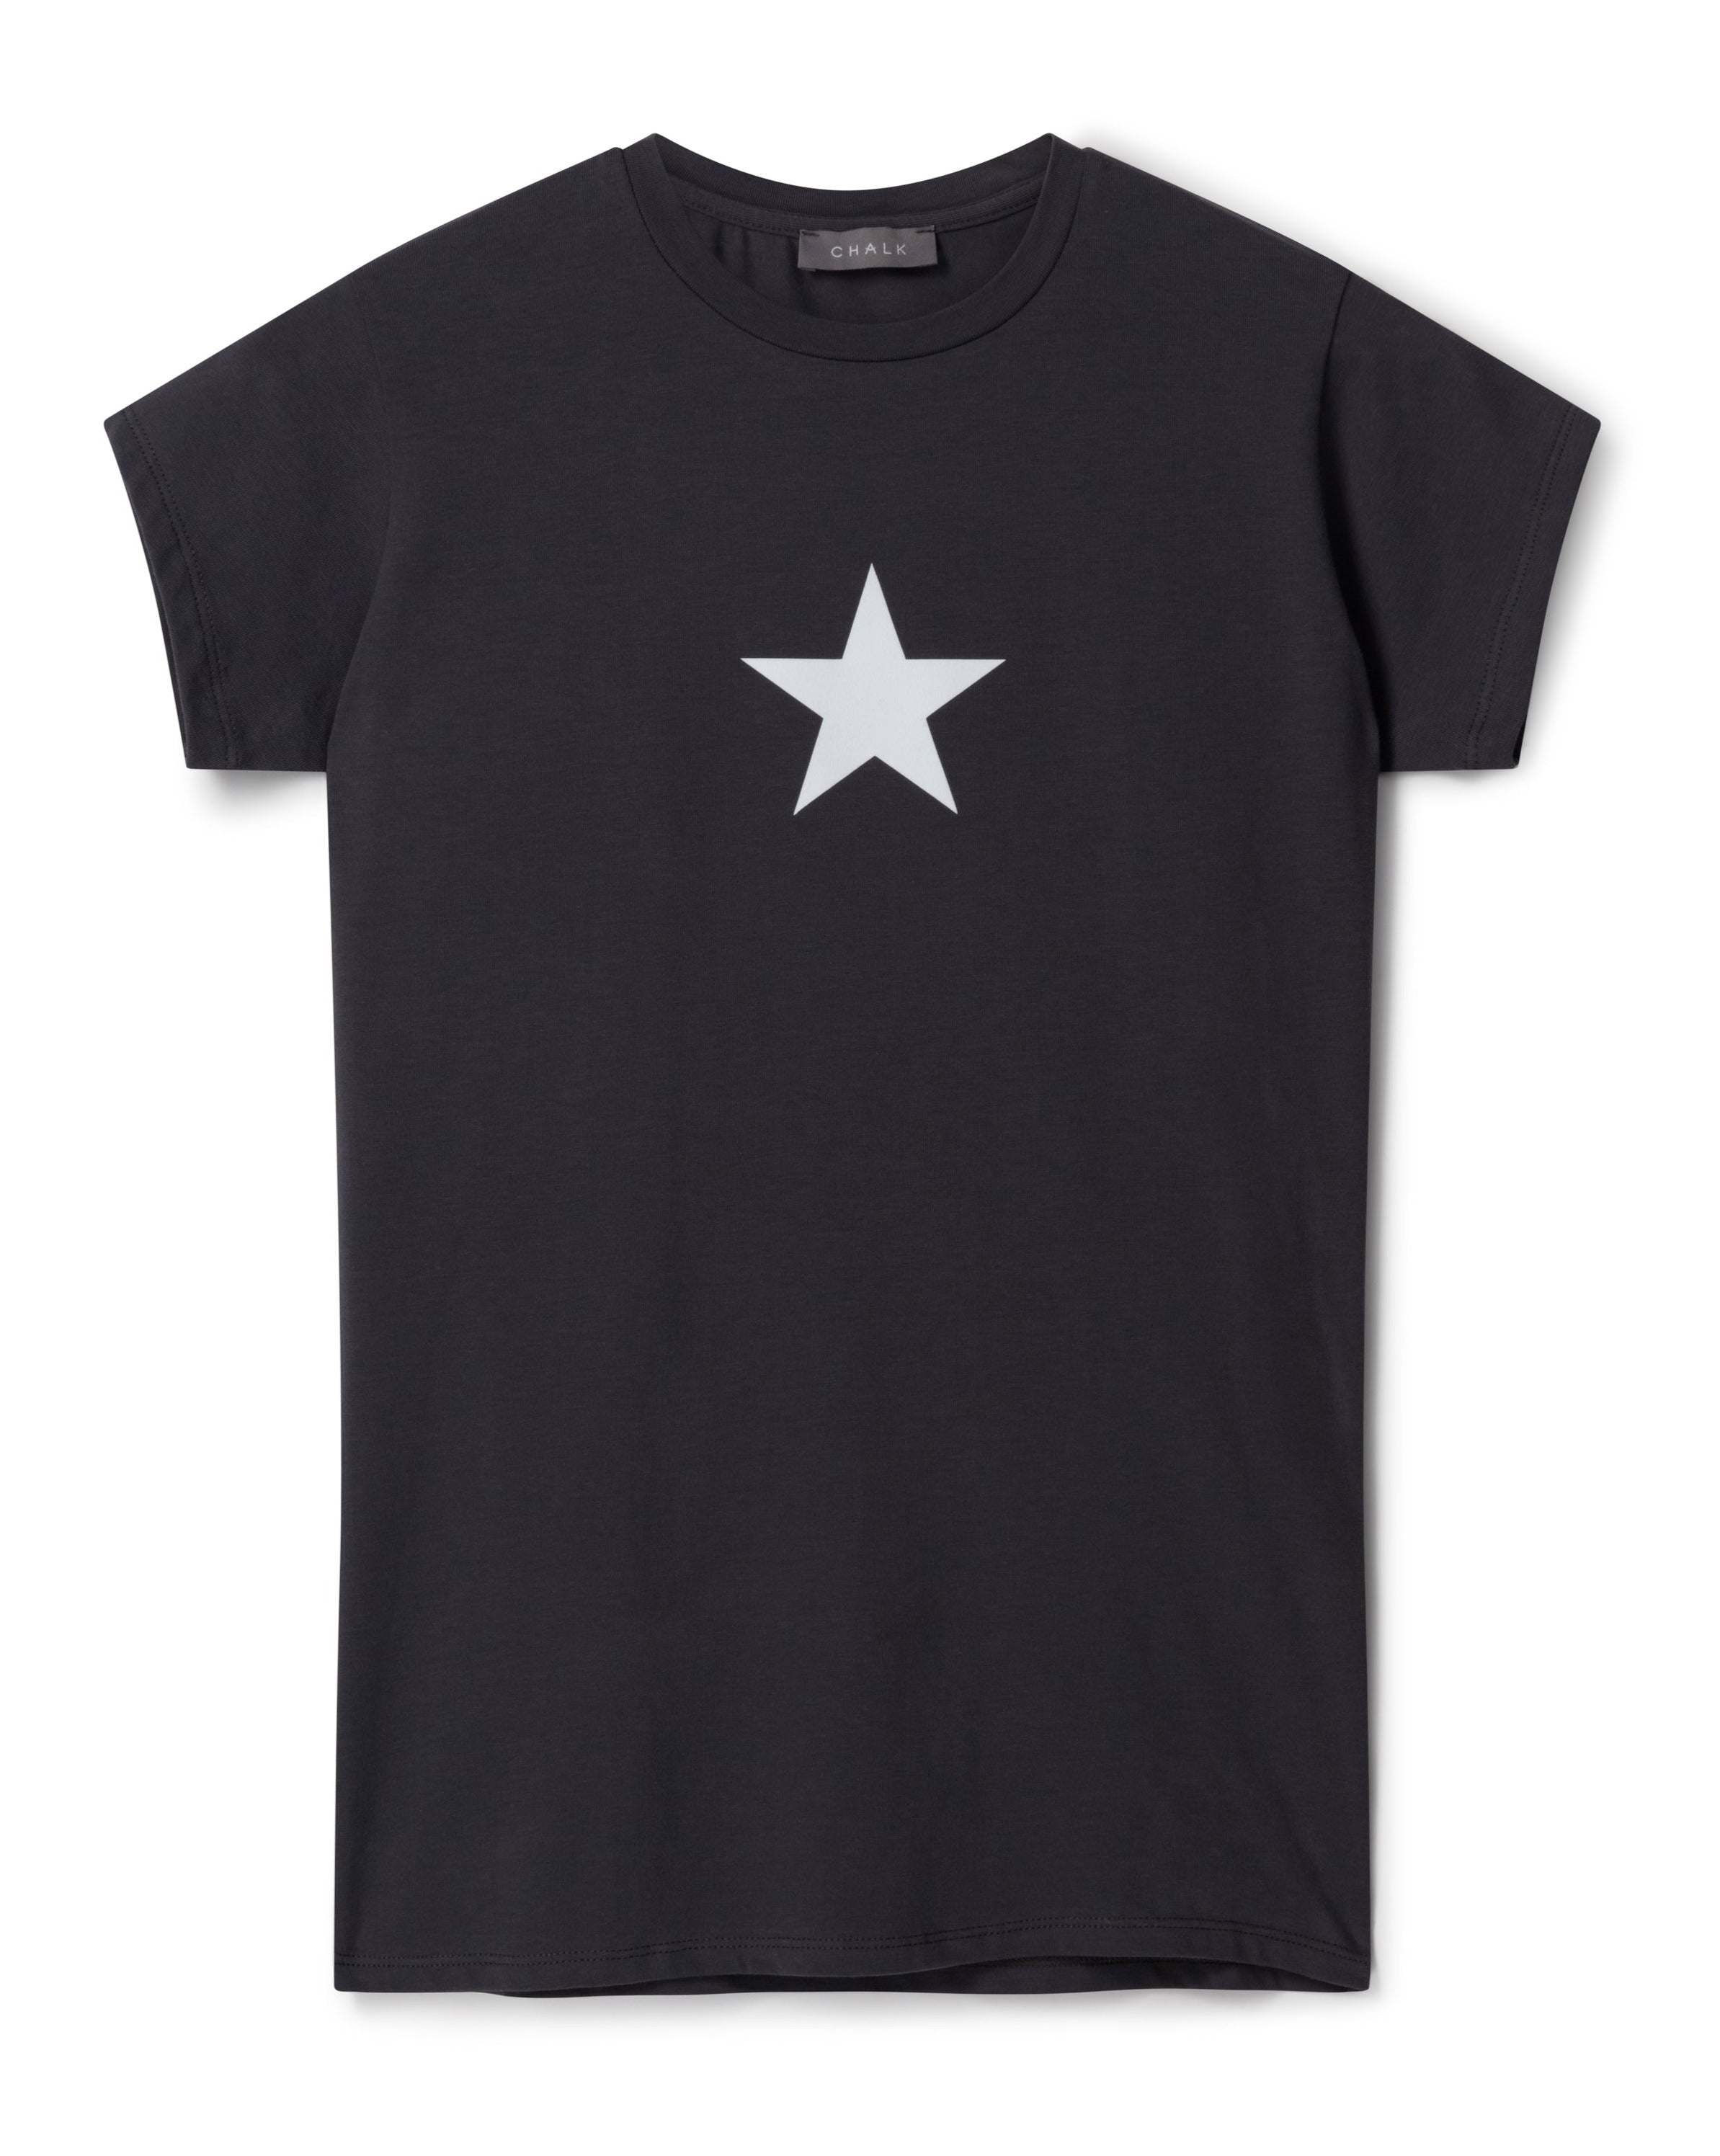 Louise t-Shirt - Charcoal with White Star